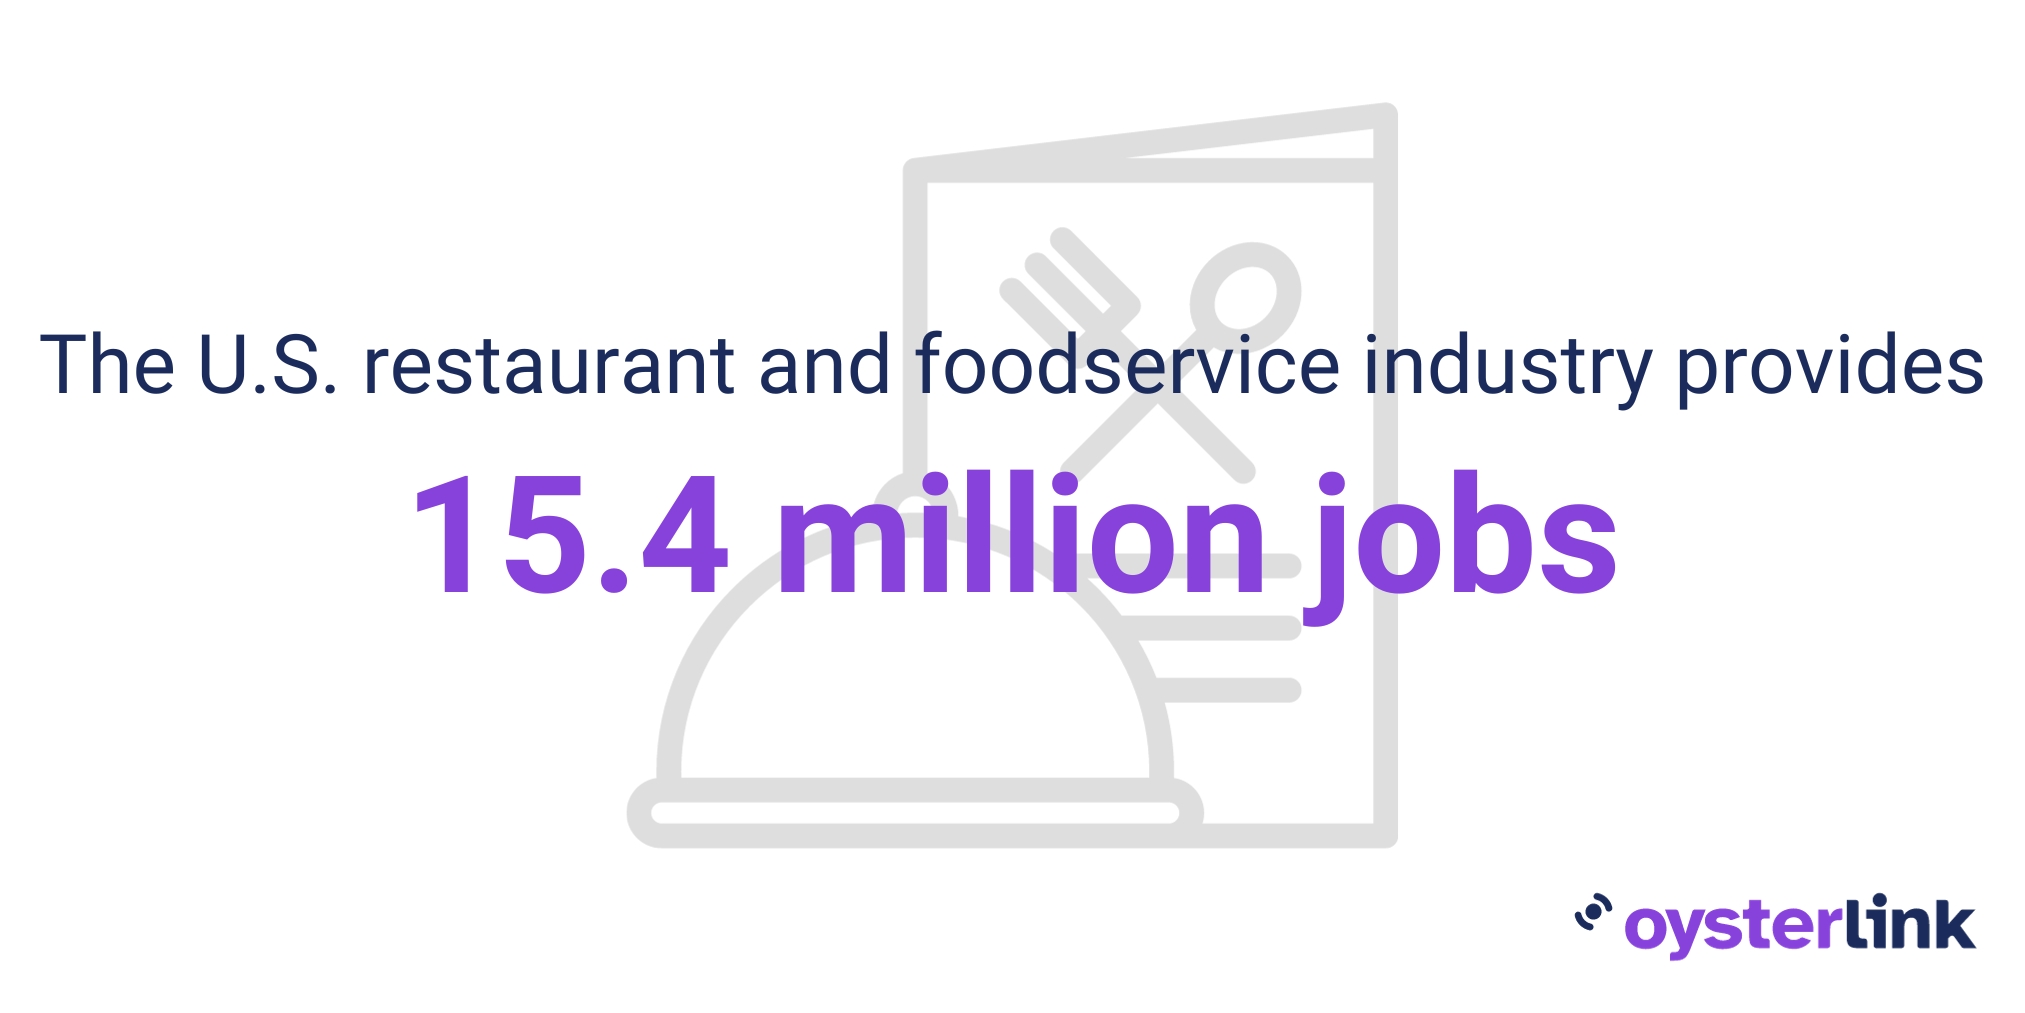 Graphic showing 15.4 million jobs are provided by the restaurant and foodservice industry